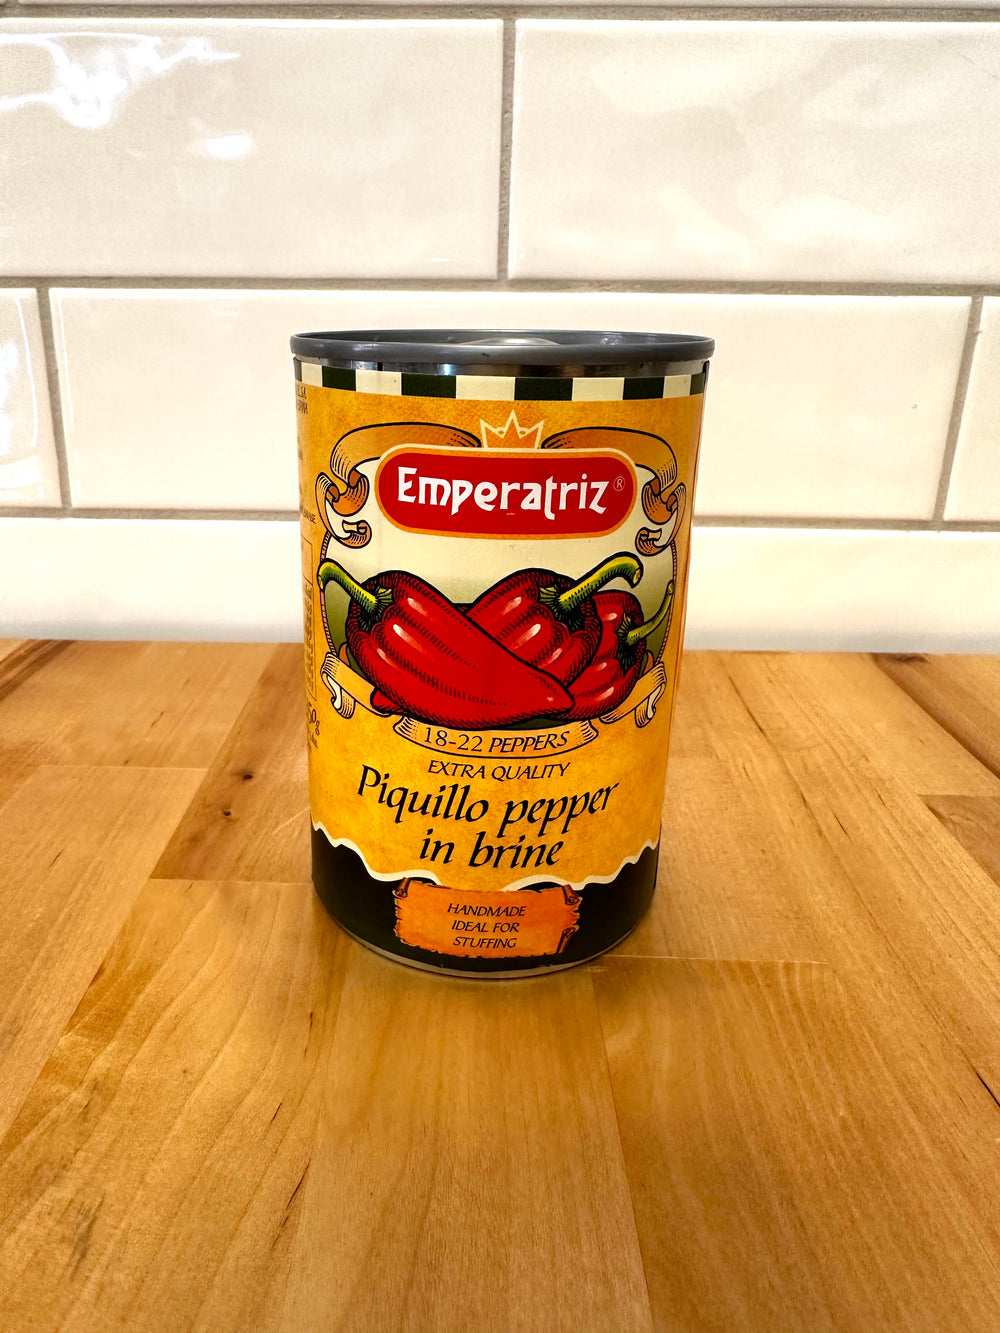 EMPERATRIZ Whole Piquillo Peppers